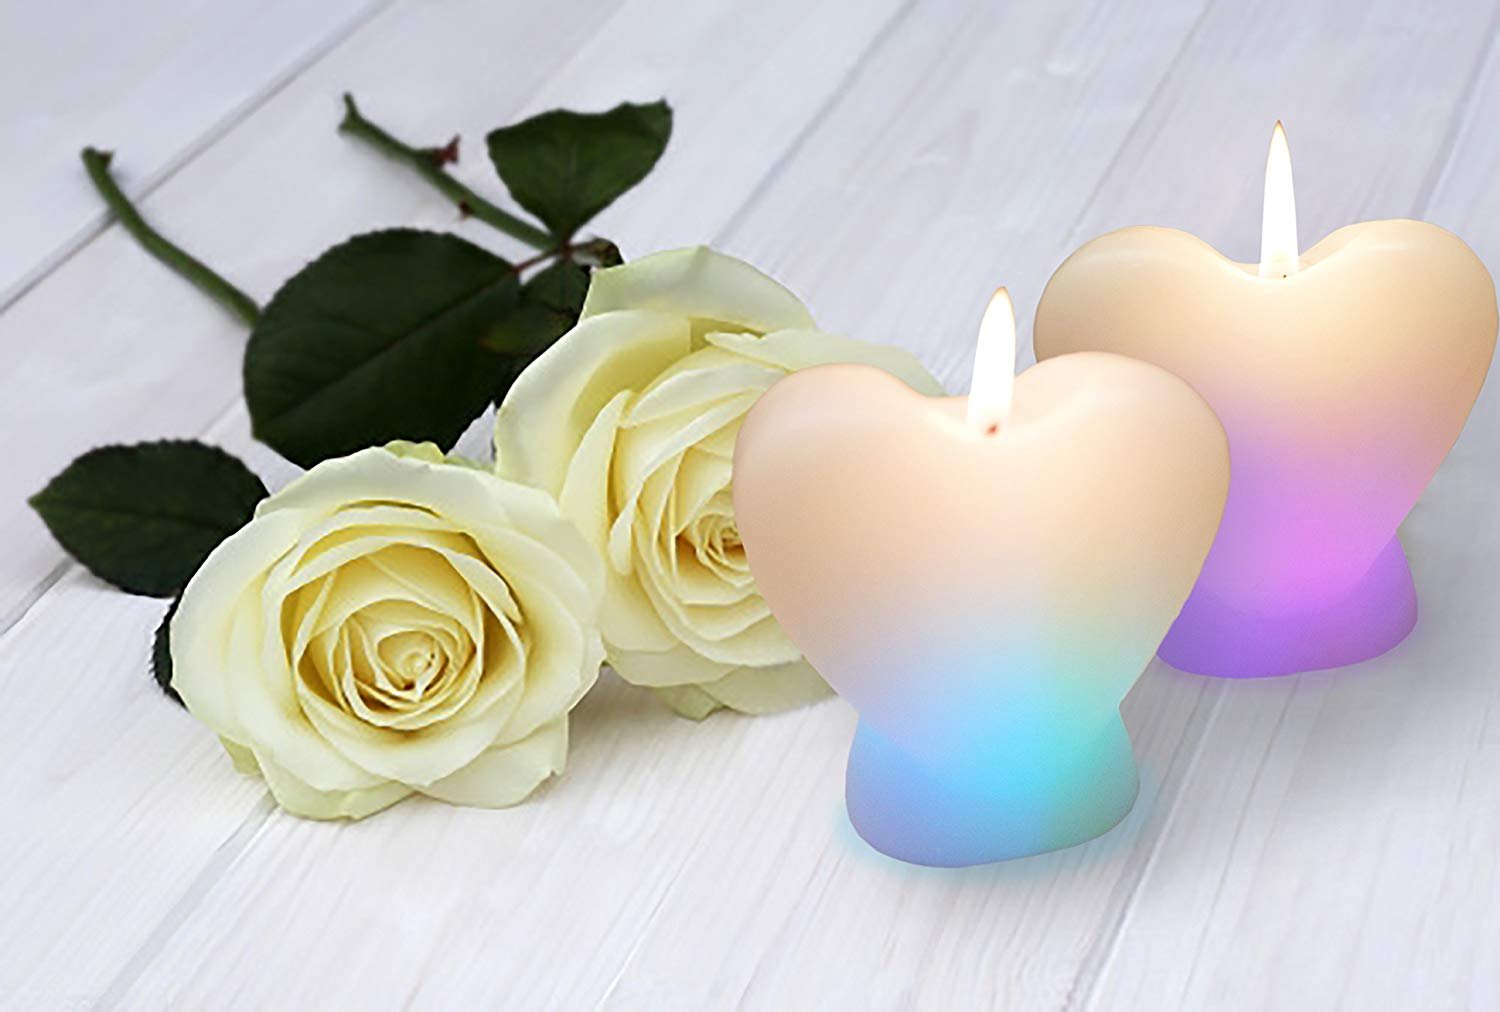 Heart Candles -Heart Shaped Wax Candle with Built In Heat Sensor That  changes Colors as They Burn. Set of 2 Candles for Holiday, Valentine, Decor  Romantic Beautiful Colors! 